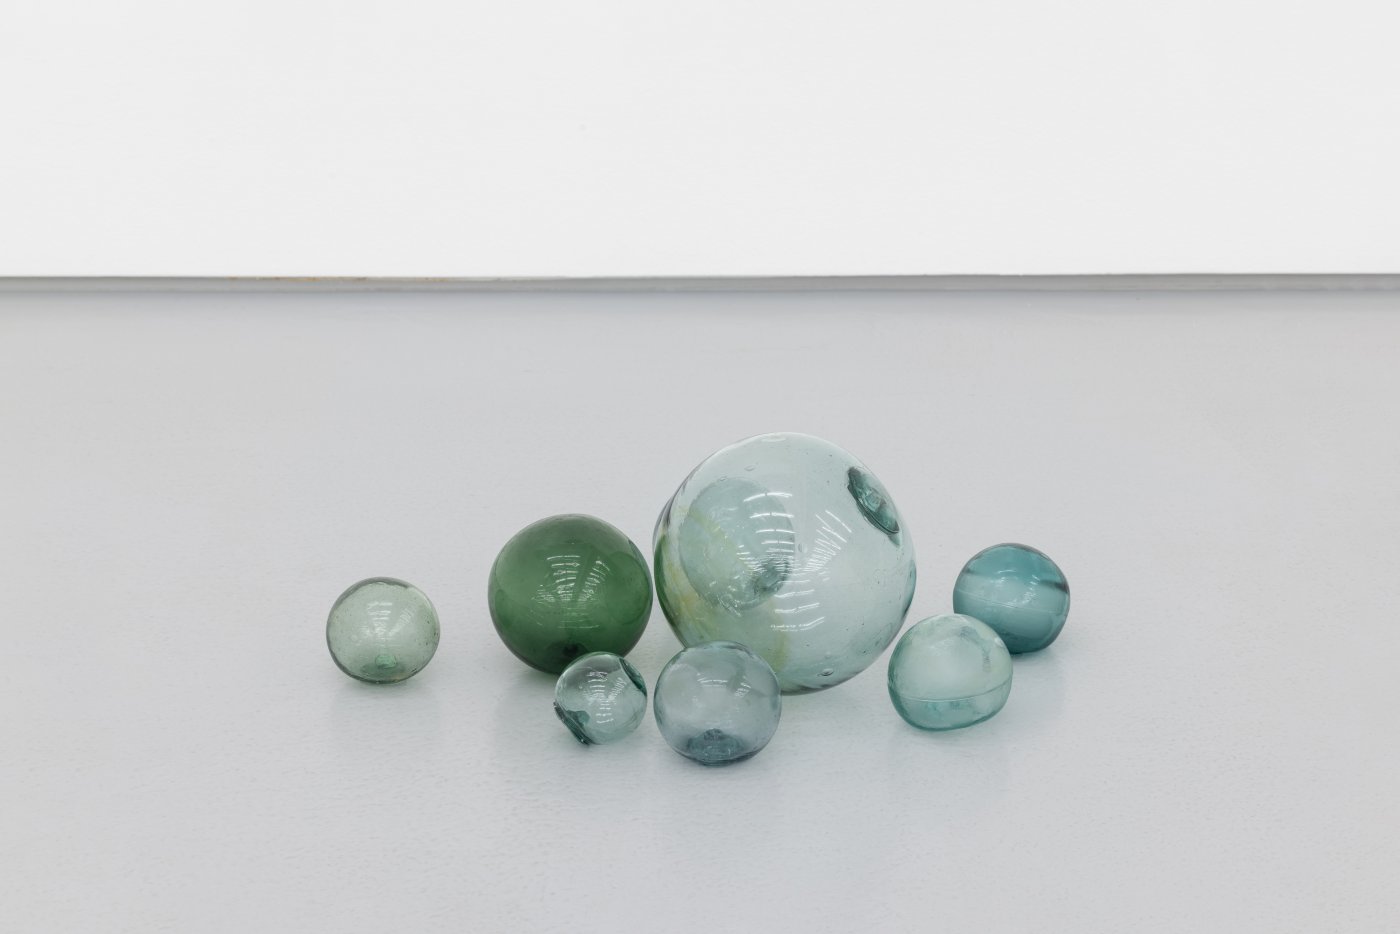 Daniel Gustav Cramer, XC, 2022. 7 japanese ukidamas. Glass spheres found over a period of several years at beaches around Point Hope, Alaska, acquired in 2014
